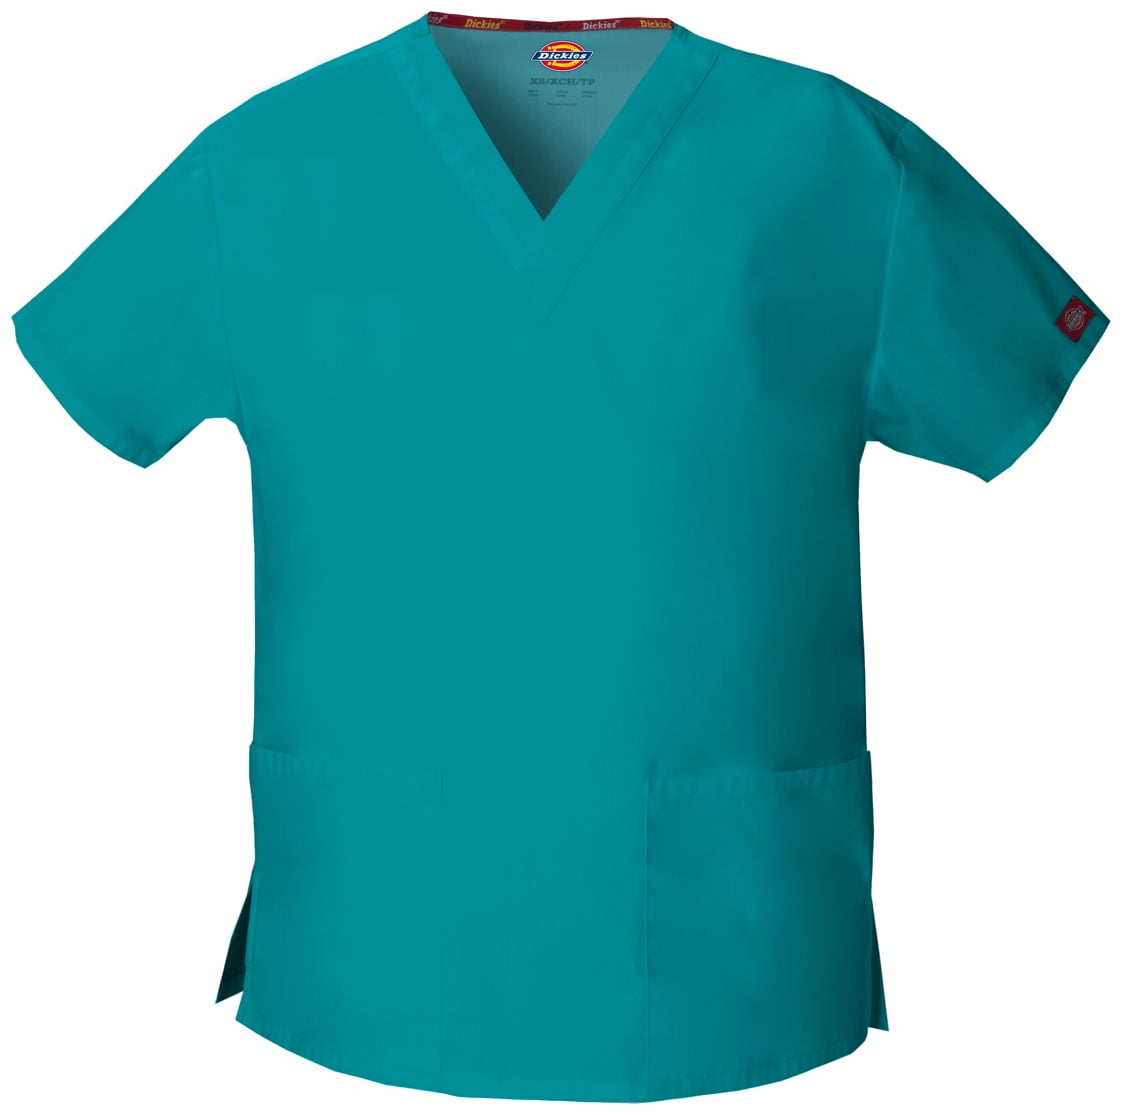 Turquoise Blue Dickies Scrubs EDS Signature V Neck Top 86706 TQWZ 